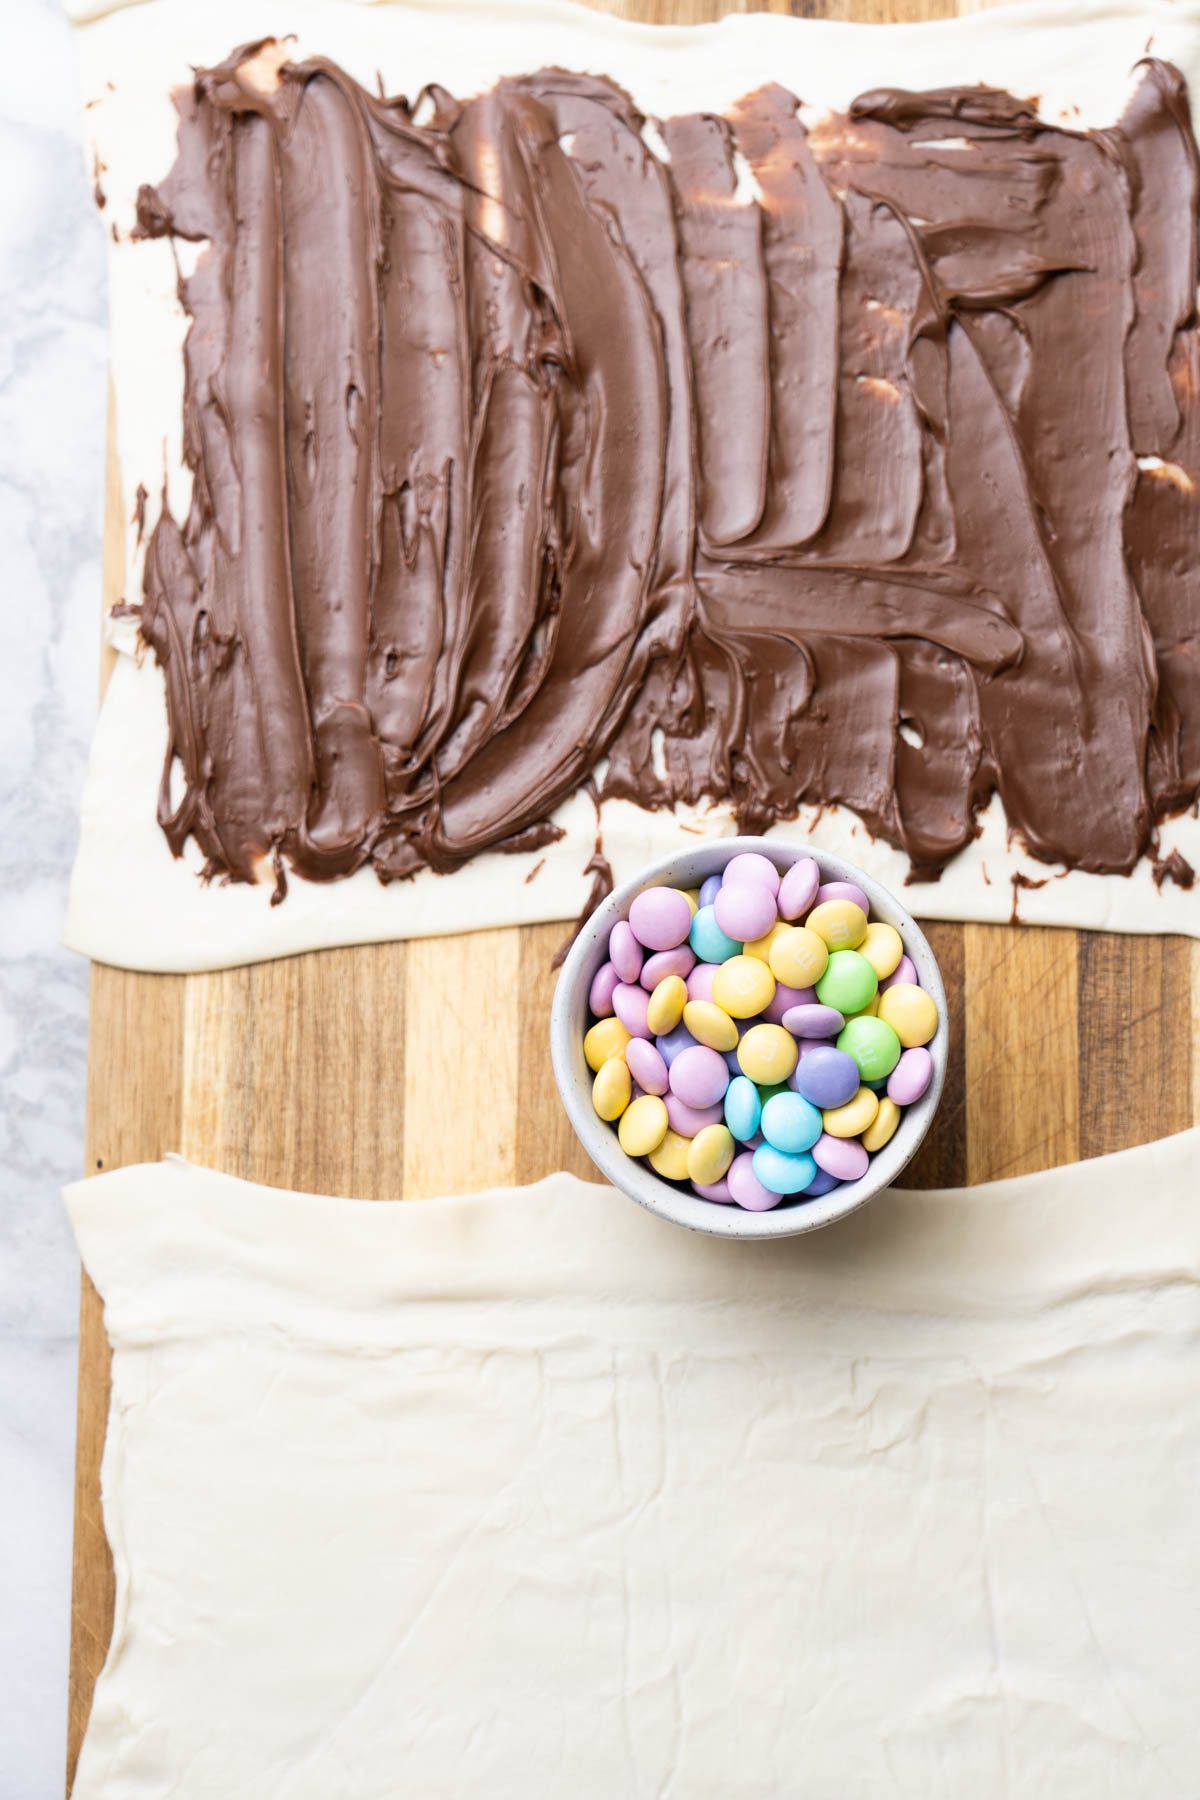 Puff pastry with Nutella on a wooden board. Bowl with Easter candy.